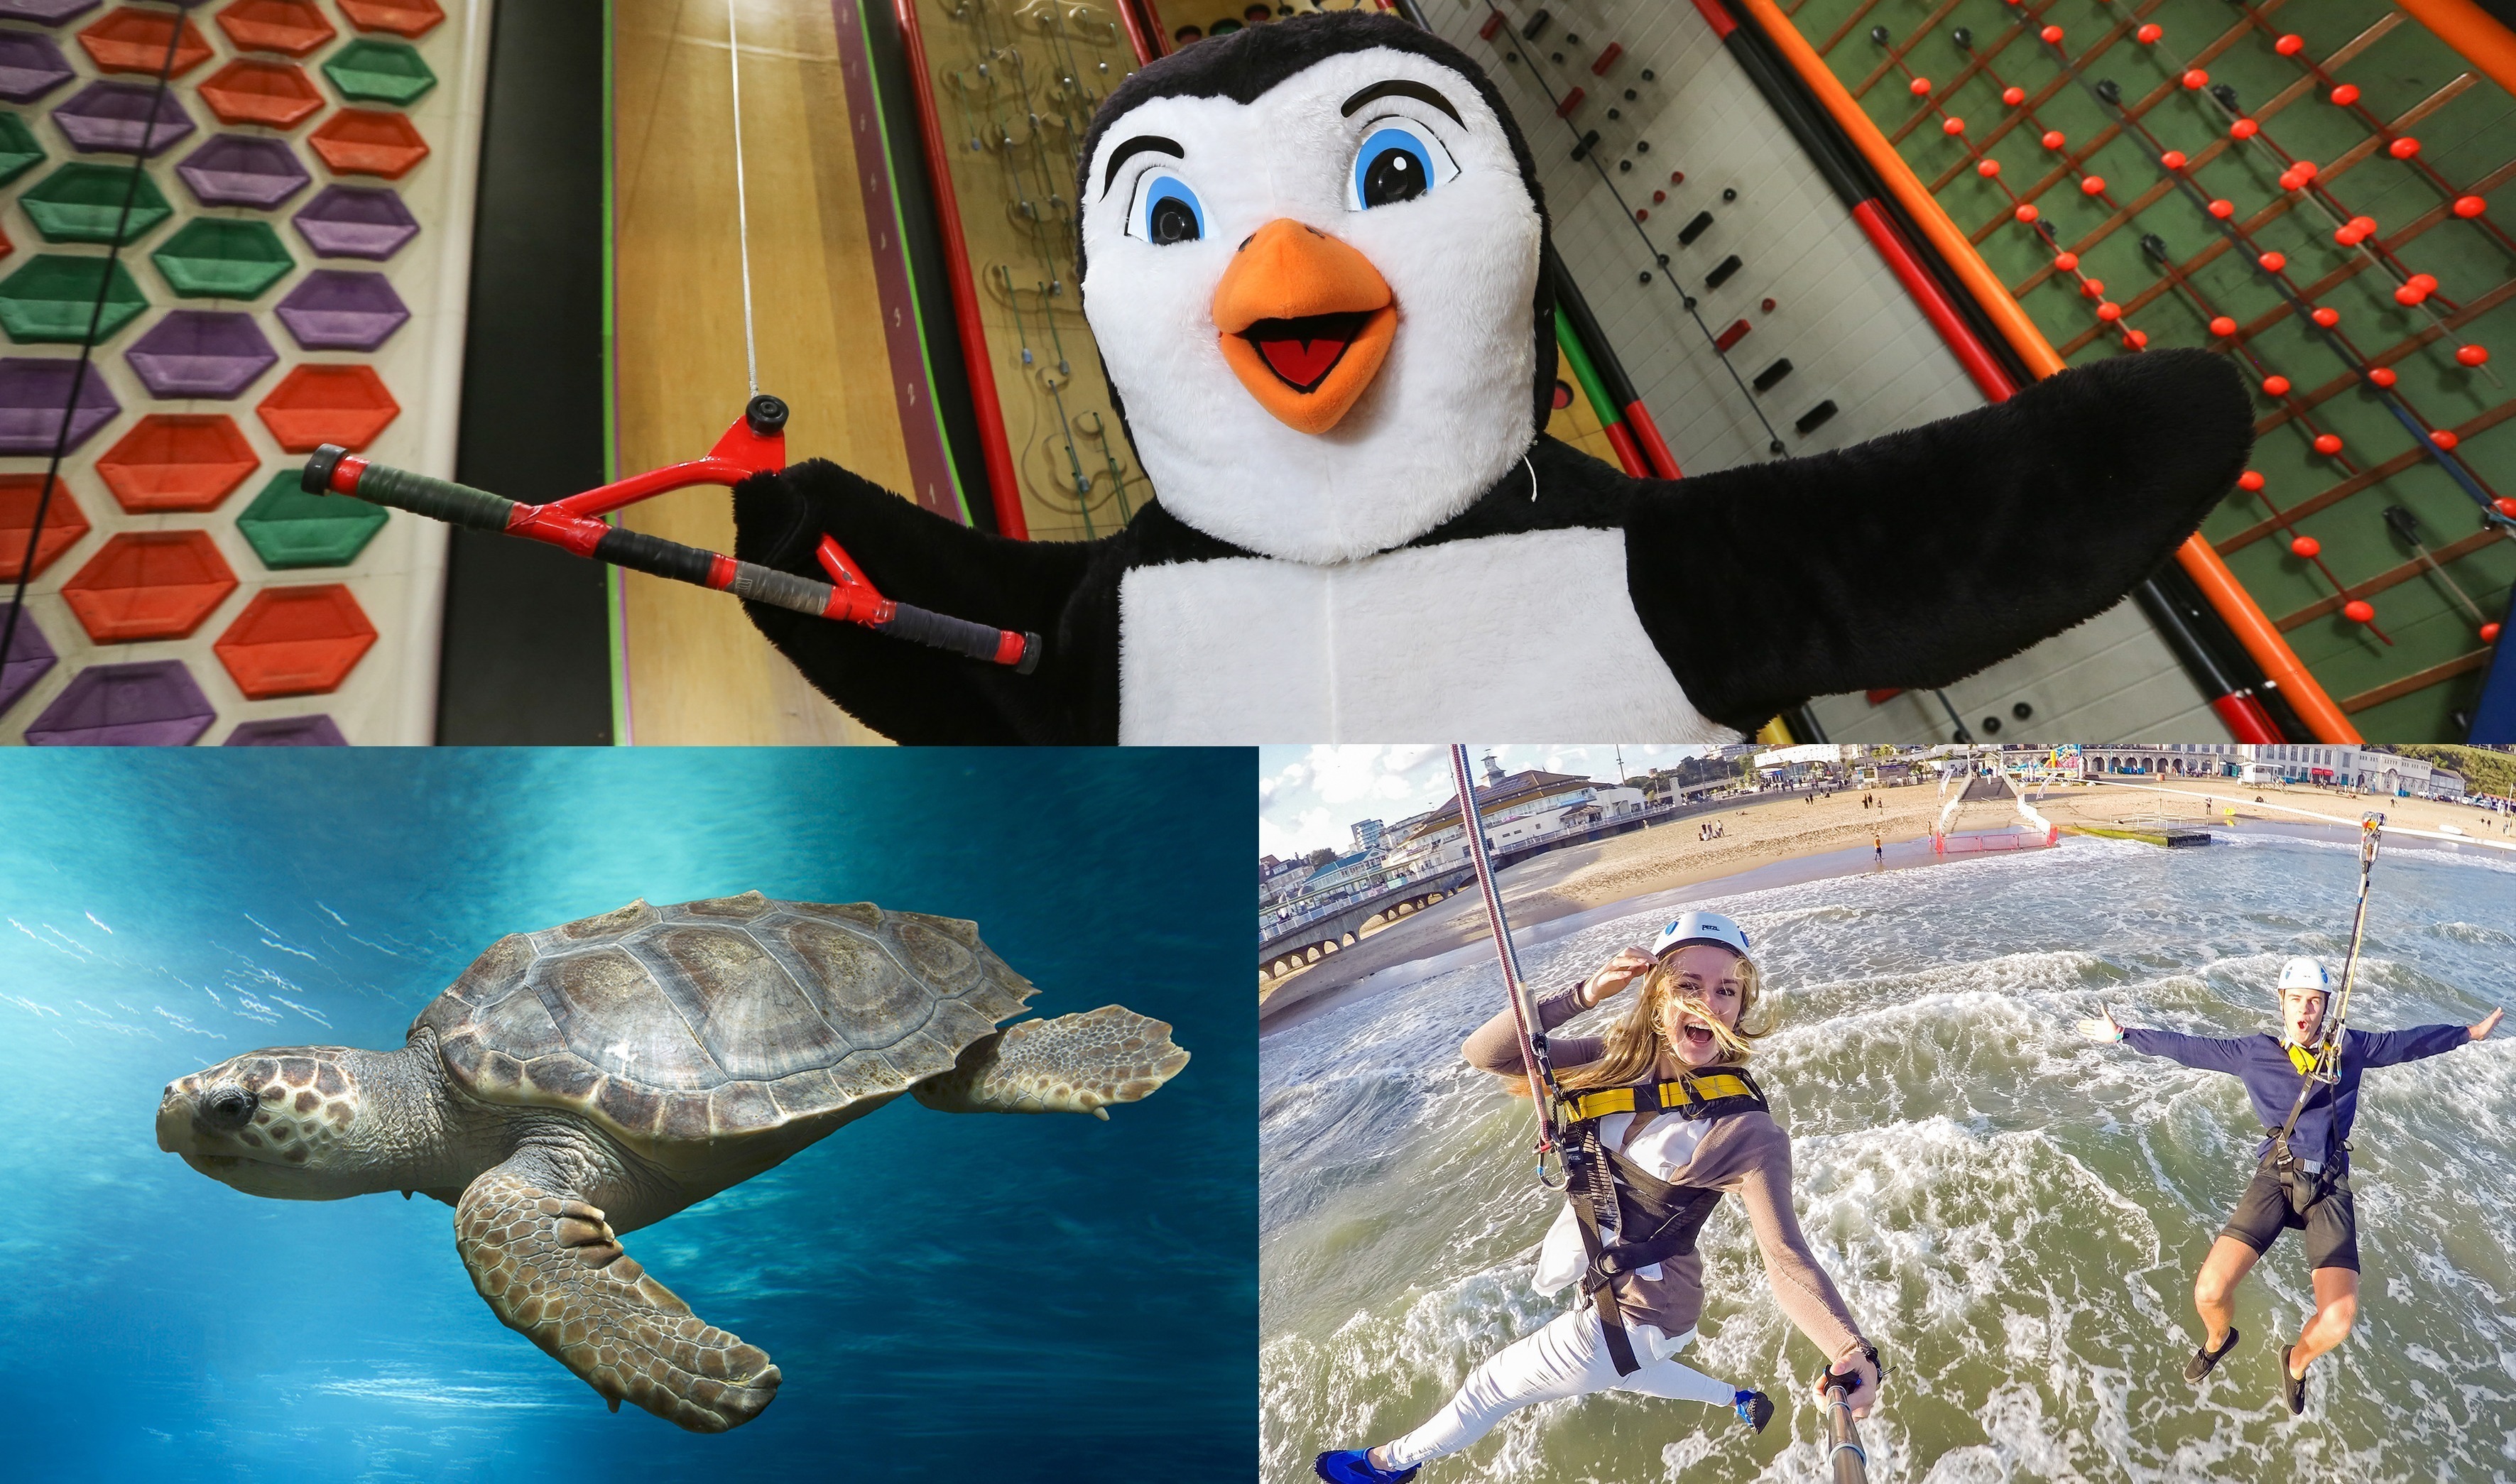 RockReef and Oceanarium, the Bournemouth Aquarium join forces to offer discounted tickets